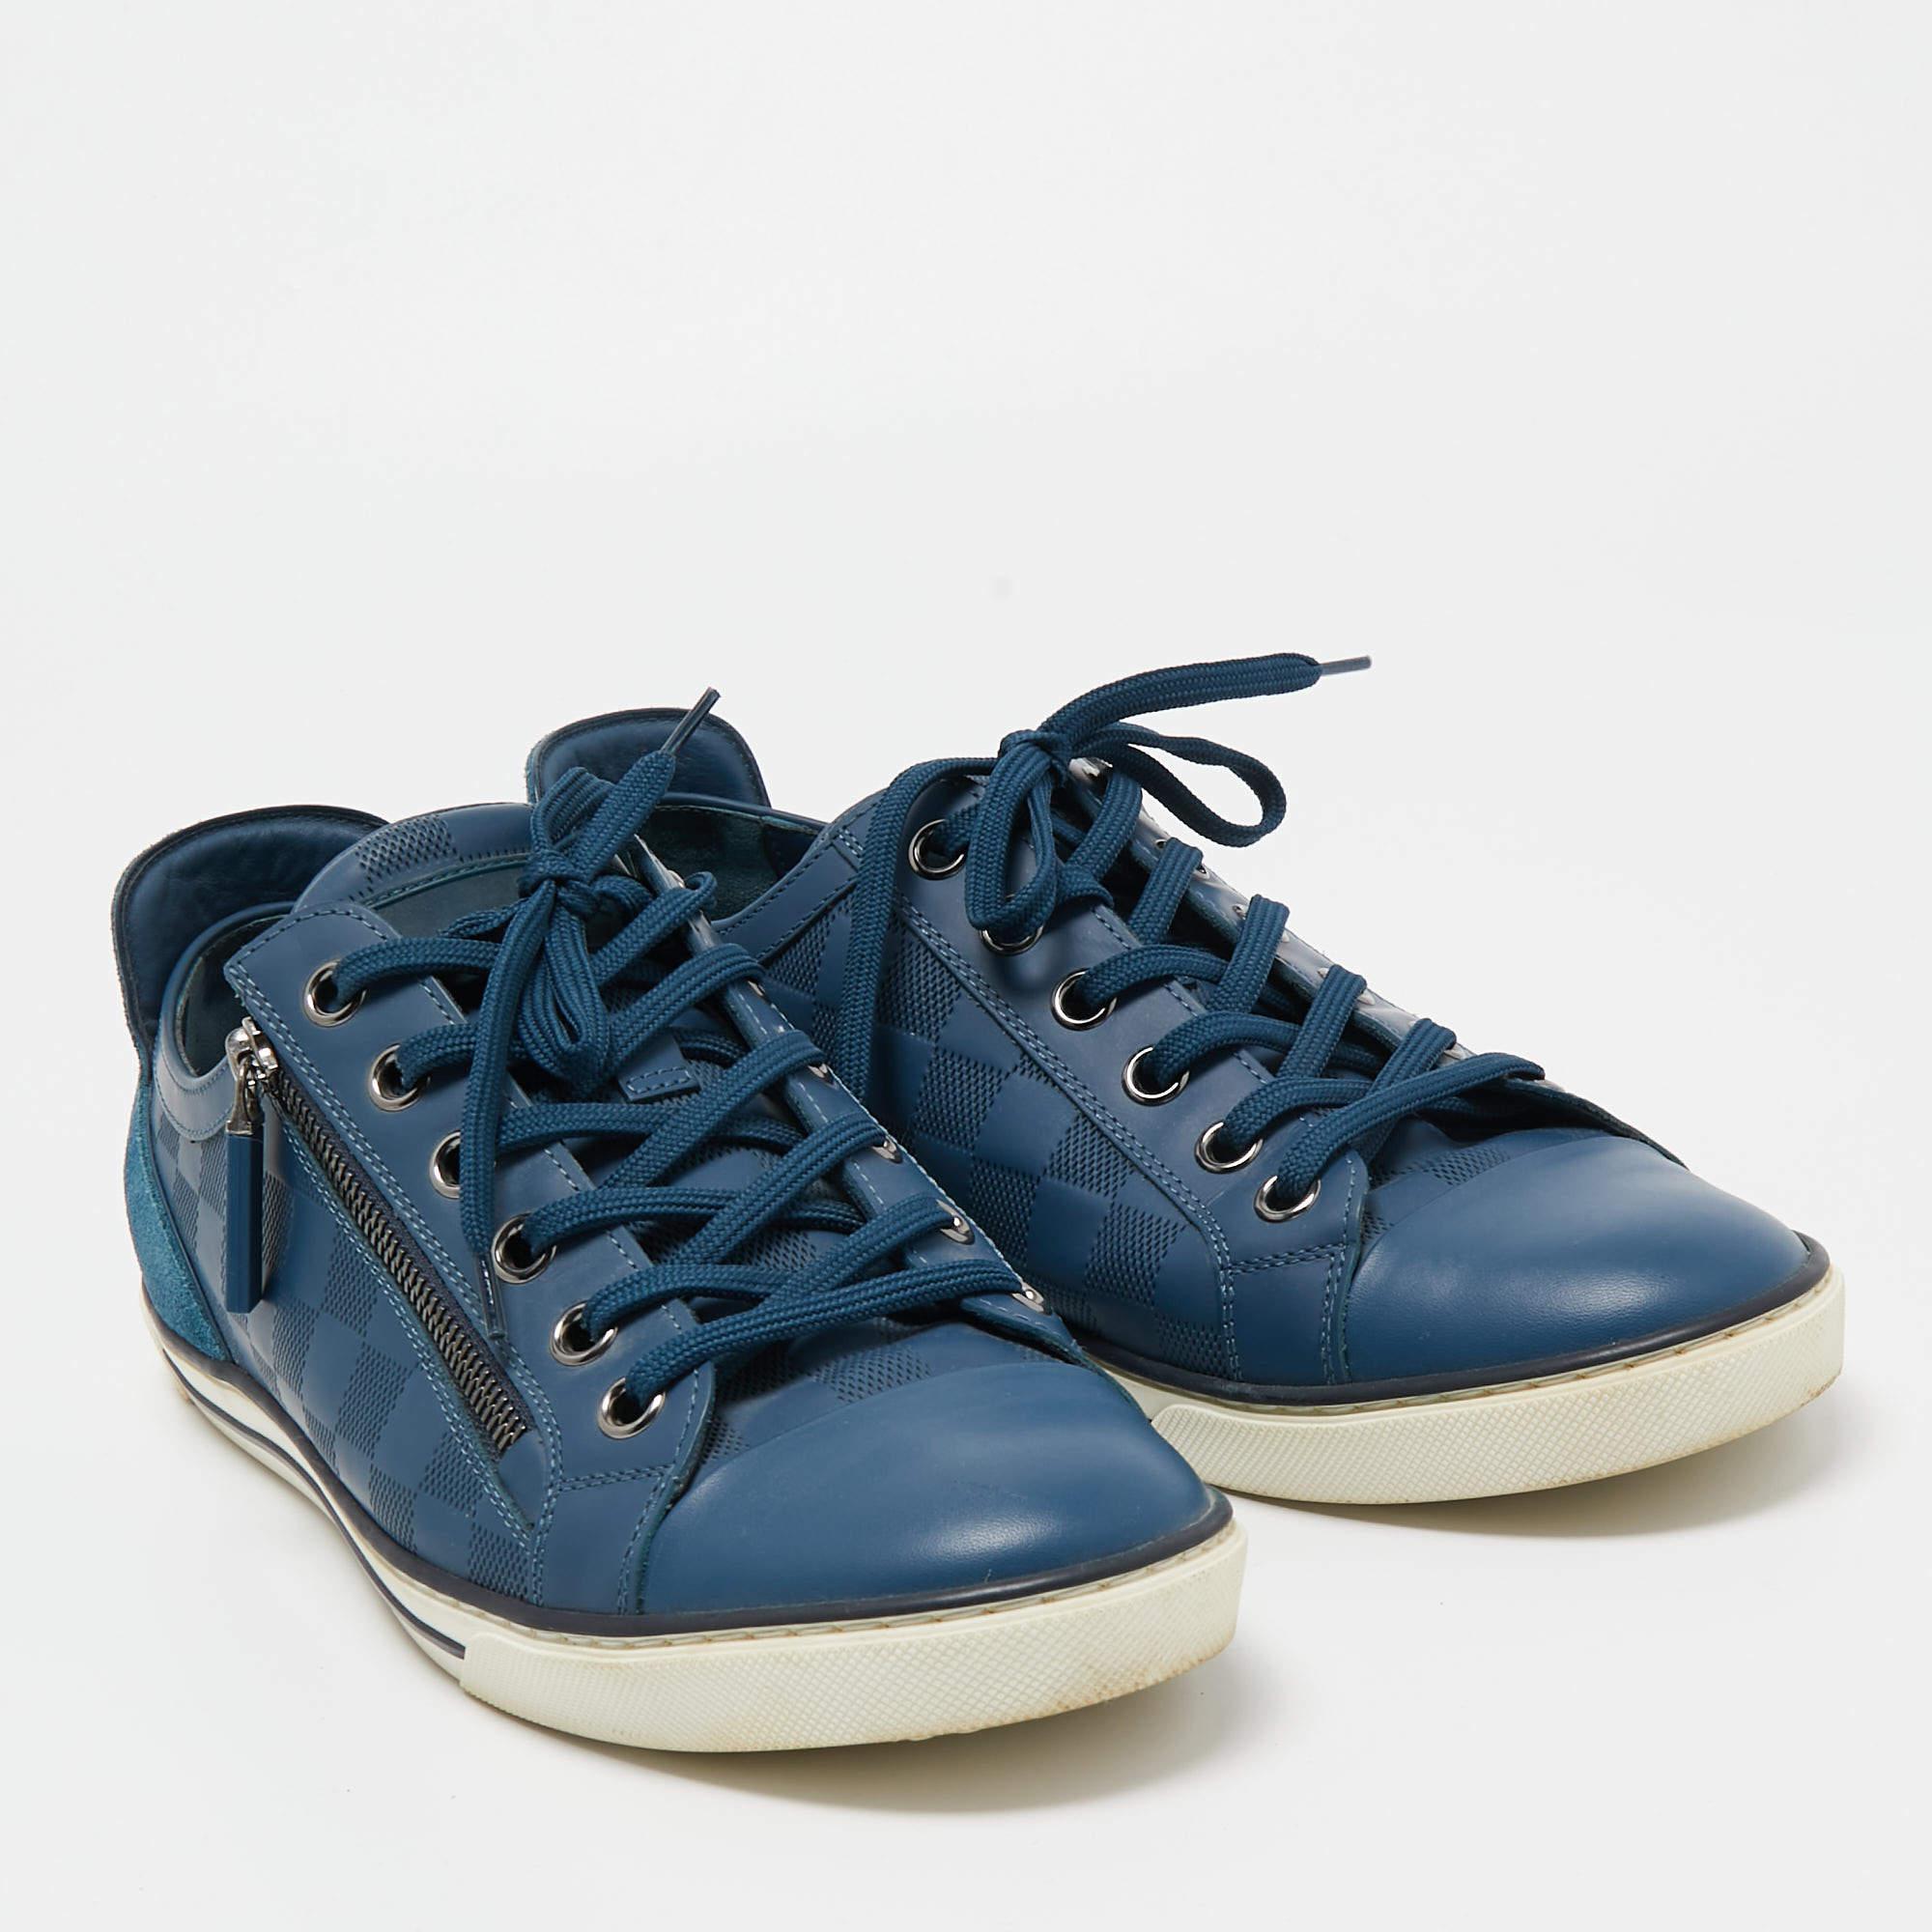 Men's Louis Vuitton Blue Damier Embossed Leather Challenge Zip Up Sneakers Size 41.5 For Sale